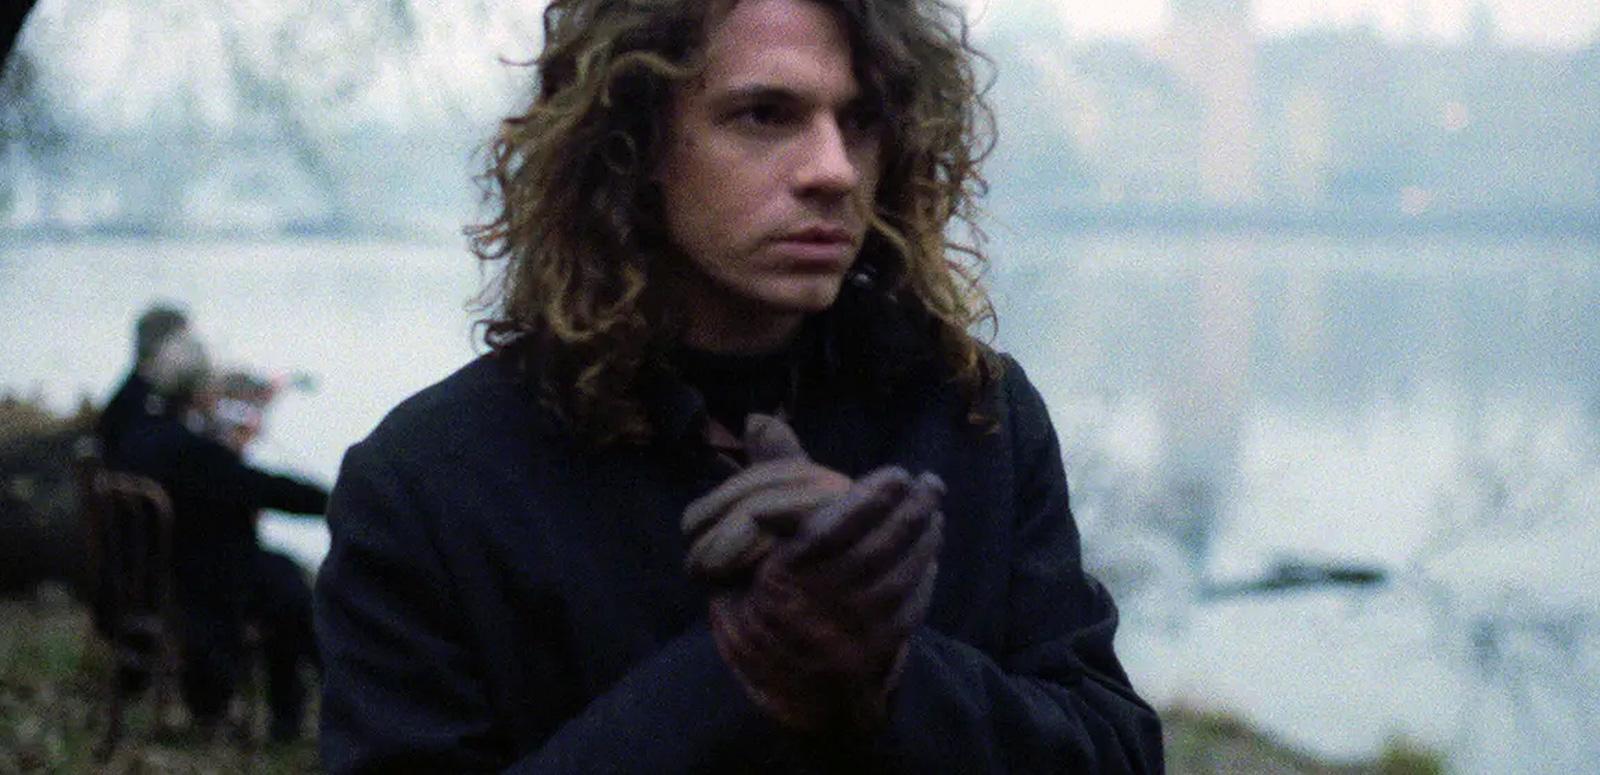 Head and shoulders shot of singer Michael Hutchence wearing a coat and gloves. There is a river and two people in the background.